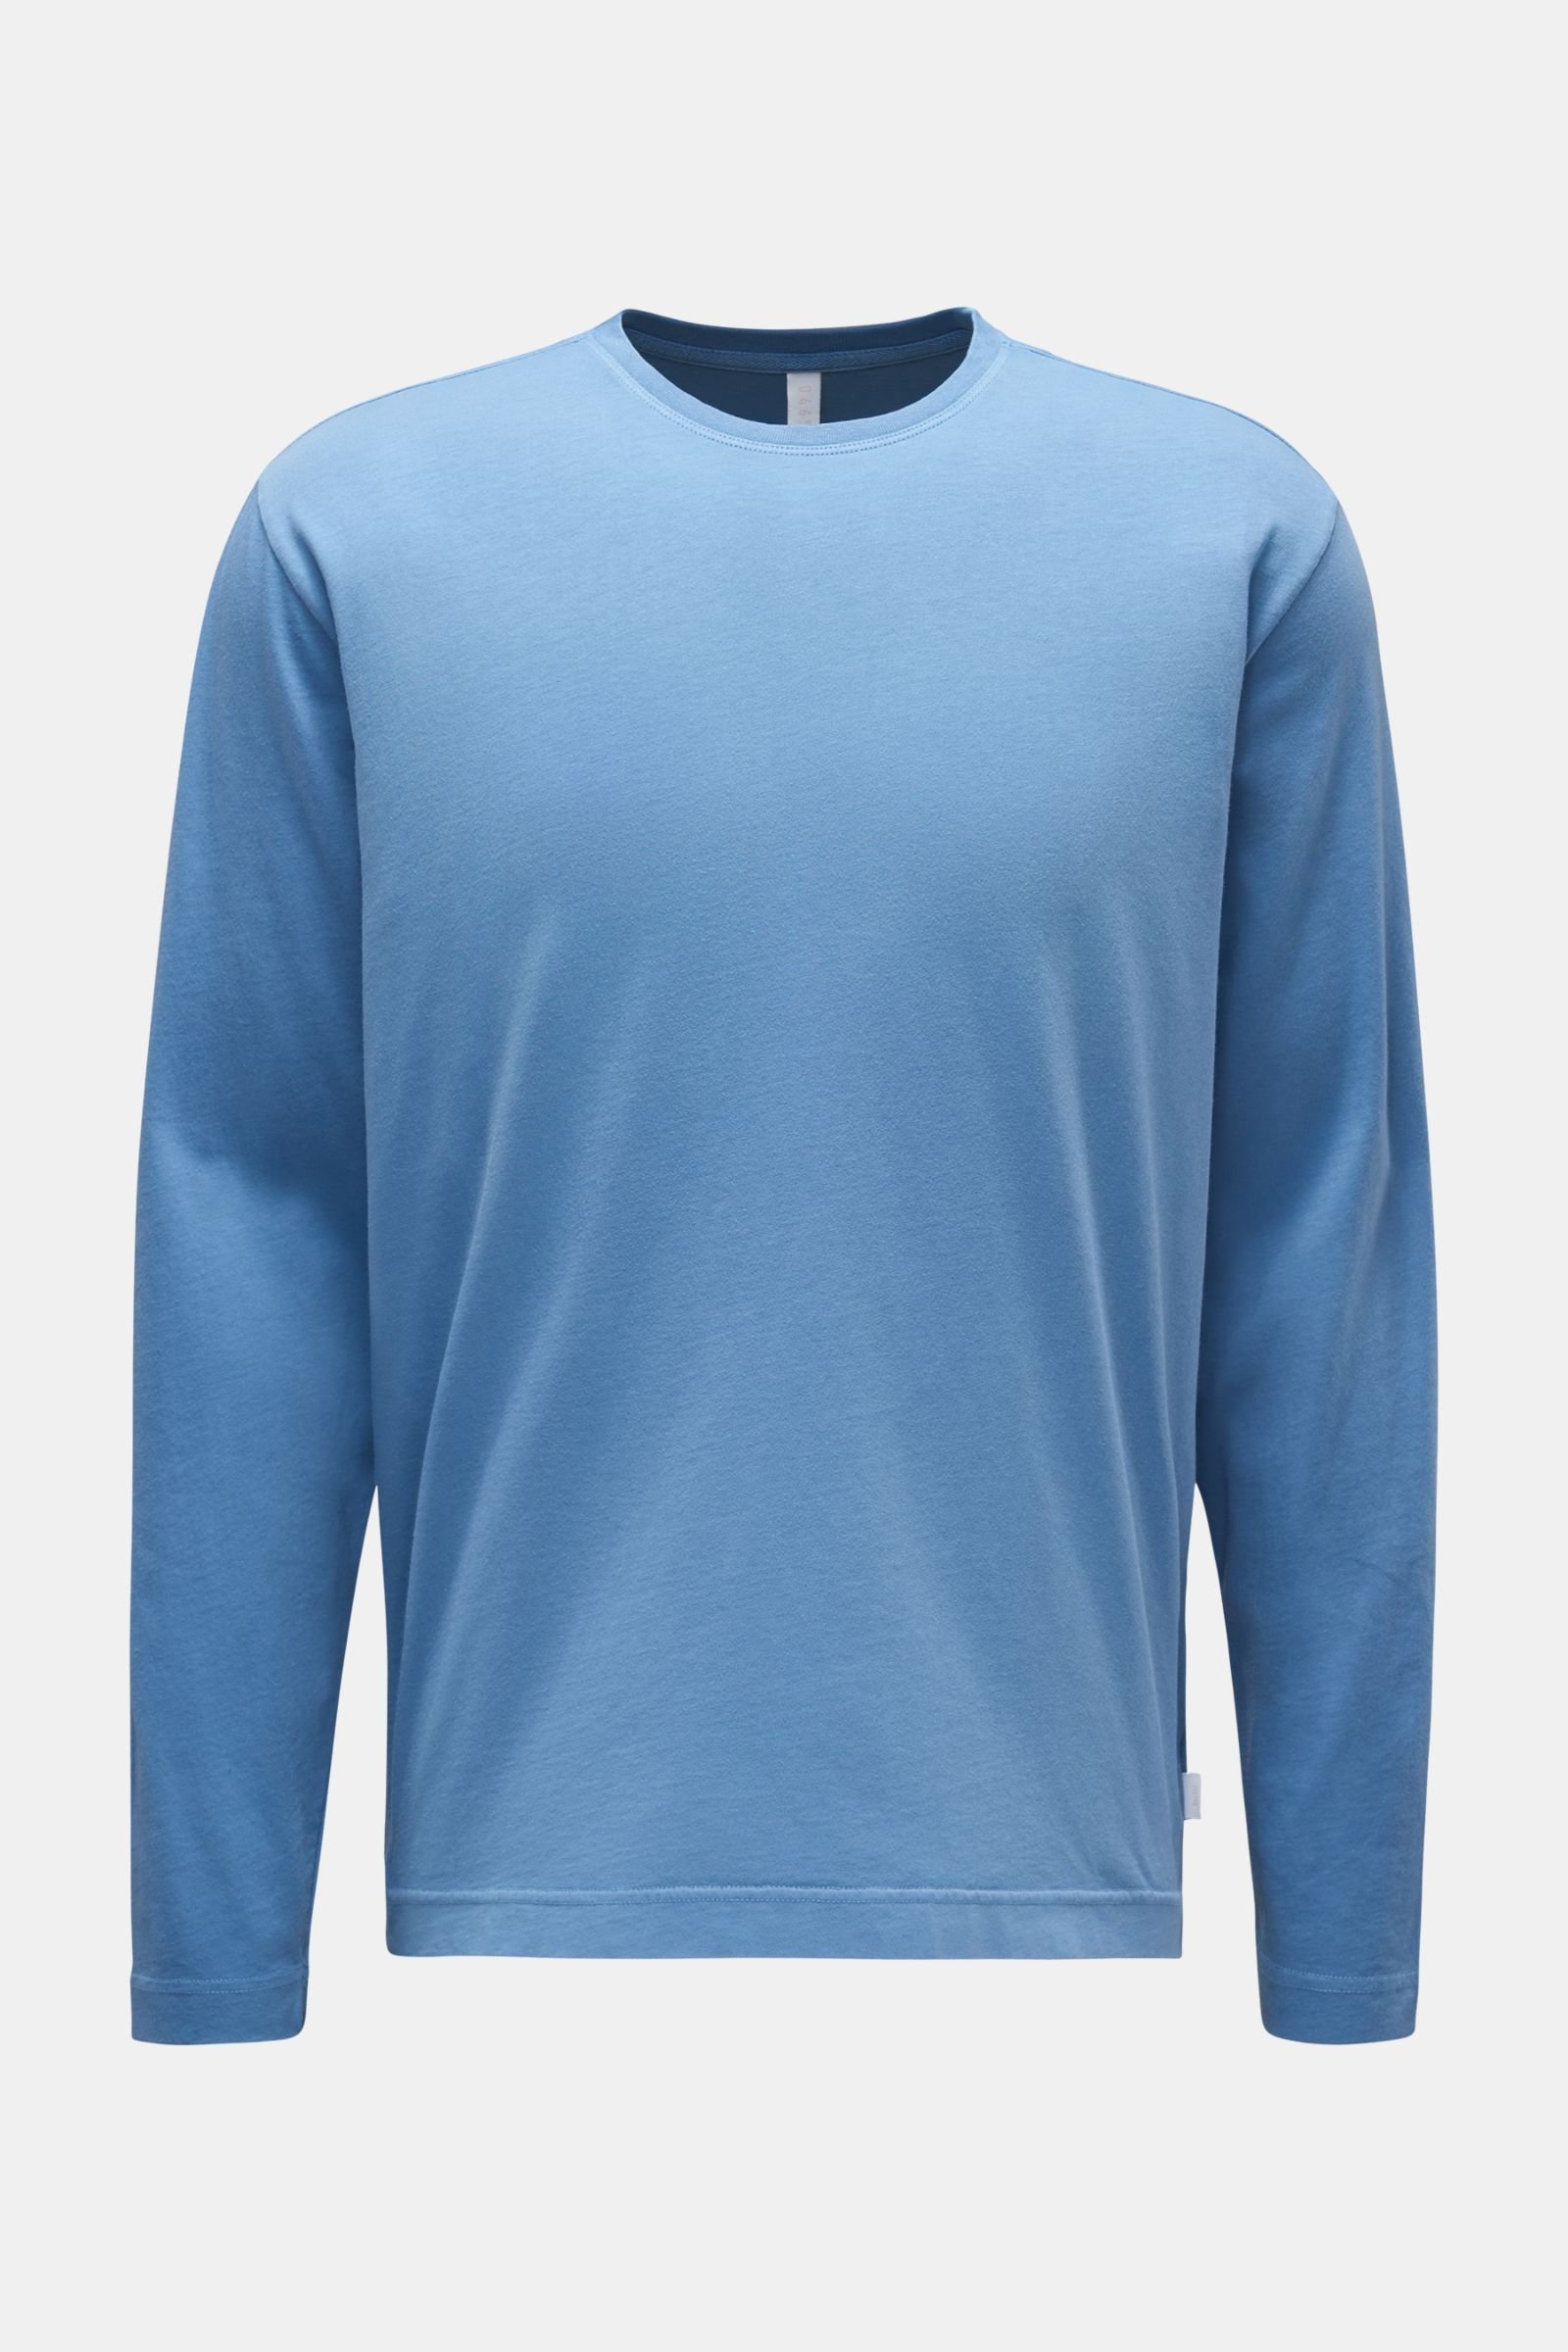 Crew neck long sleeve 'Oyster Jersey Tee' smoky blue